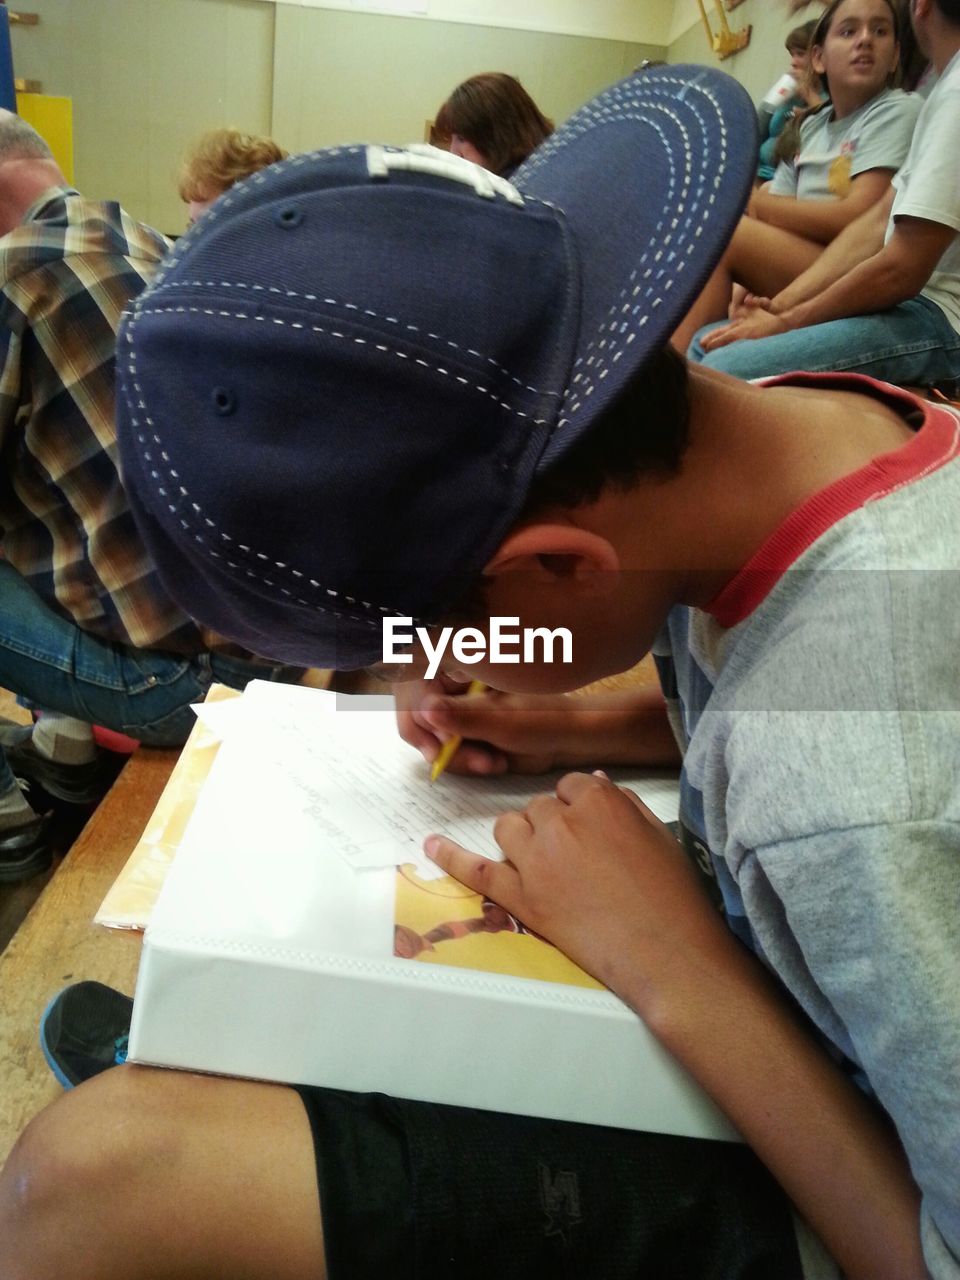 Boy wearing cap studying in classroom